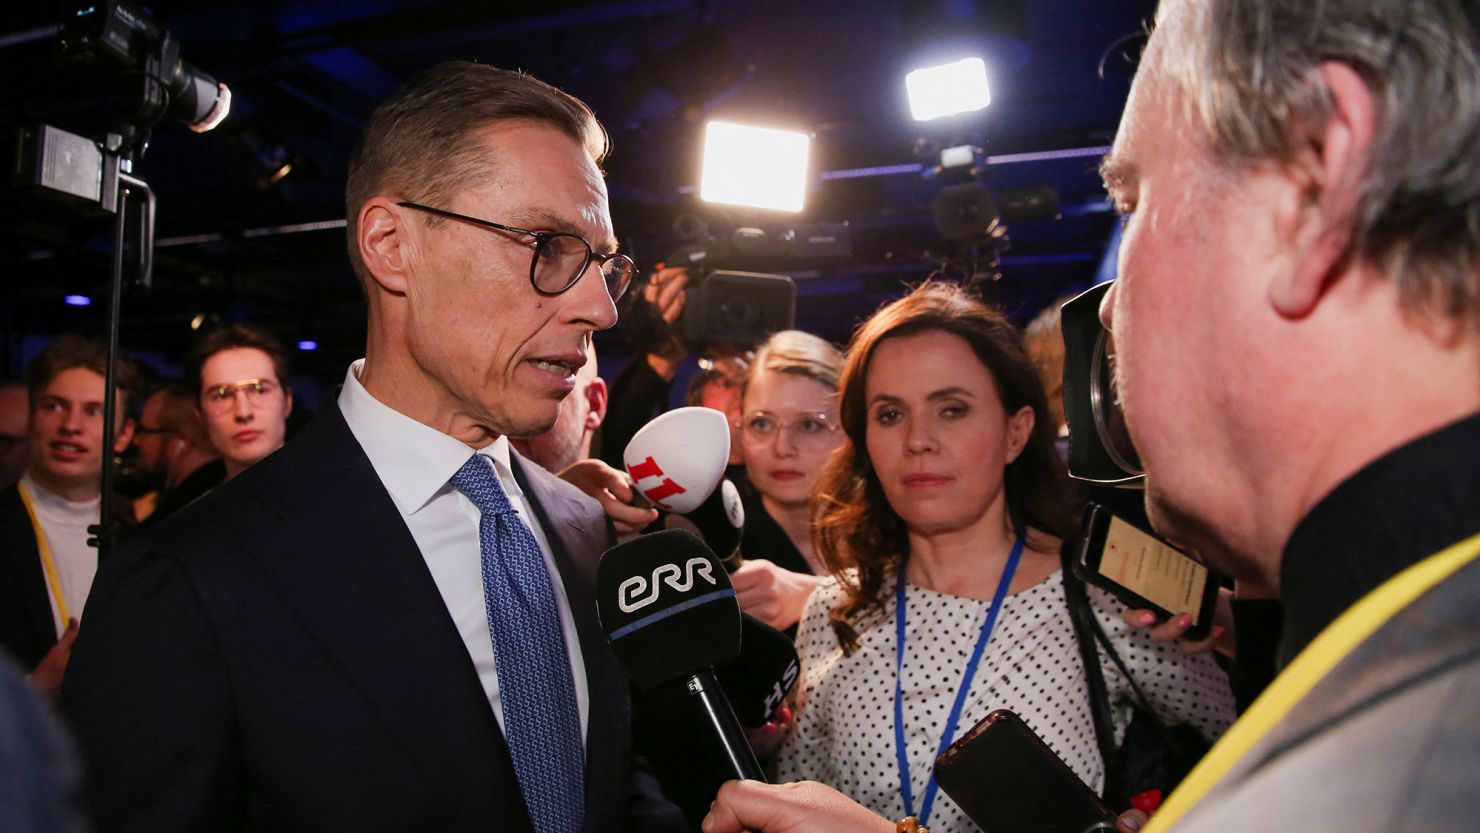 National Coalition Party candidate Alexander Stubb pictured at an election night event in Helsinki on Sunday.